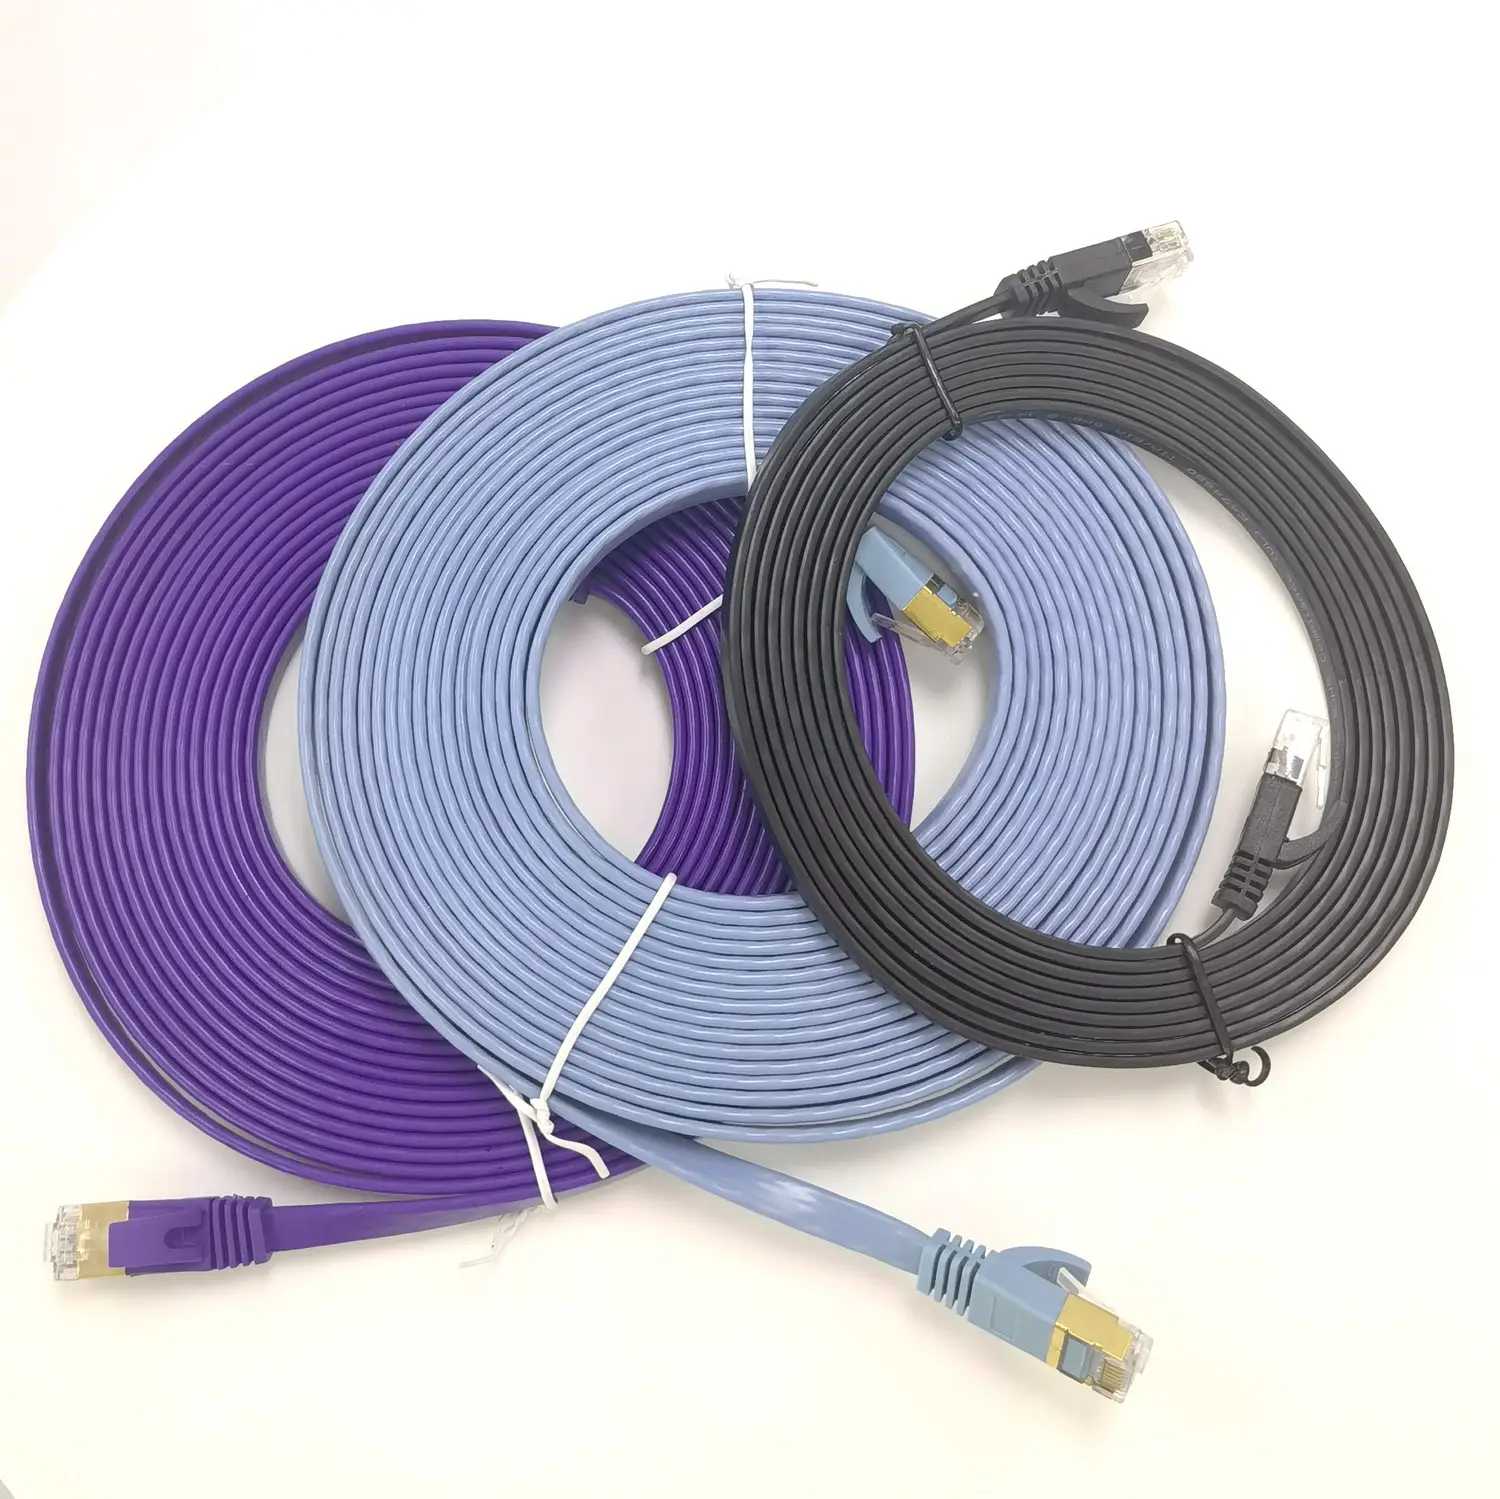 Hot sell Best Price Flat Cat5e Cat6 28AWG 30AWG RJ45 UTP Patch Cord Elevator Cable Ethernet Cable Manufacturer FX-CT11-C6-UTP-5M